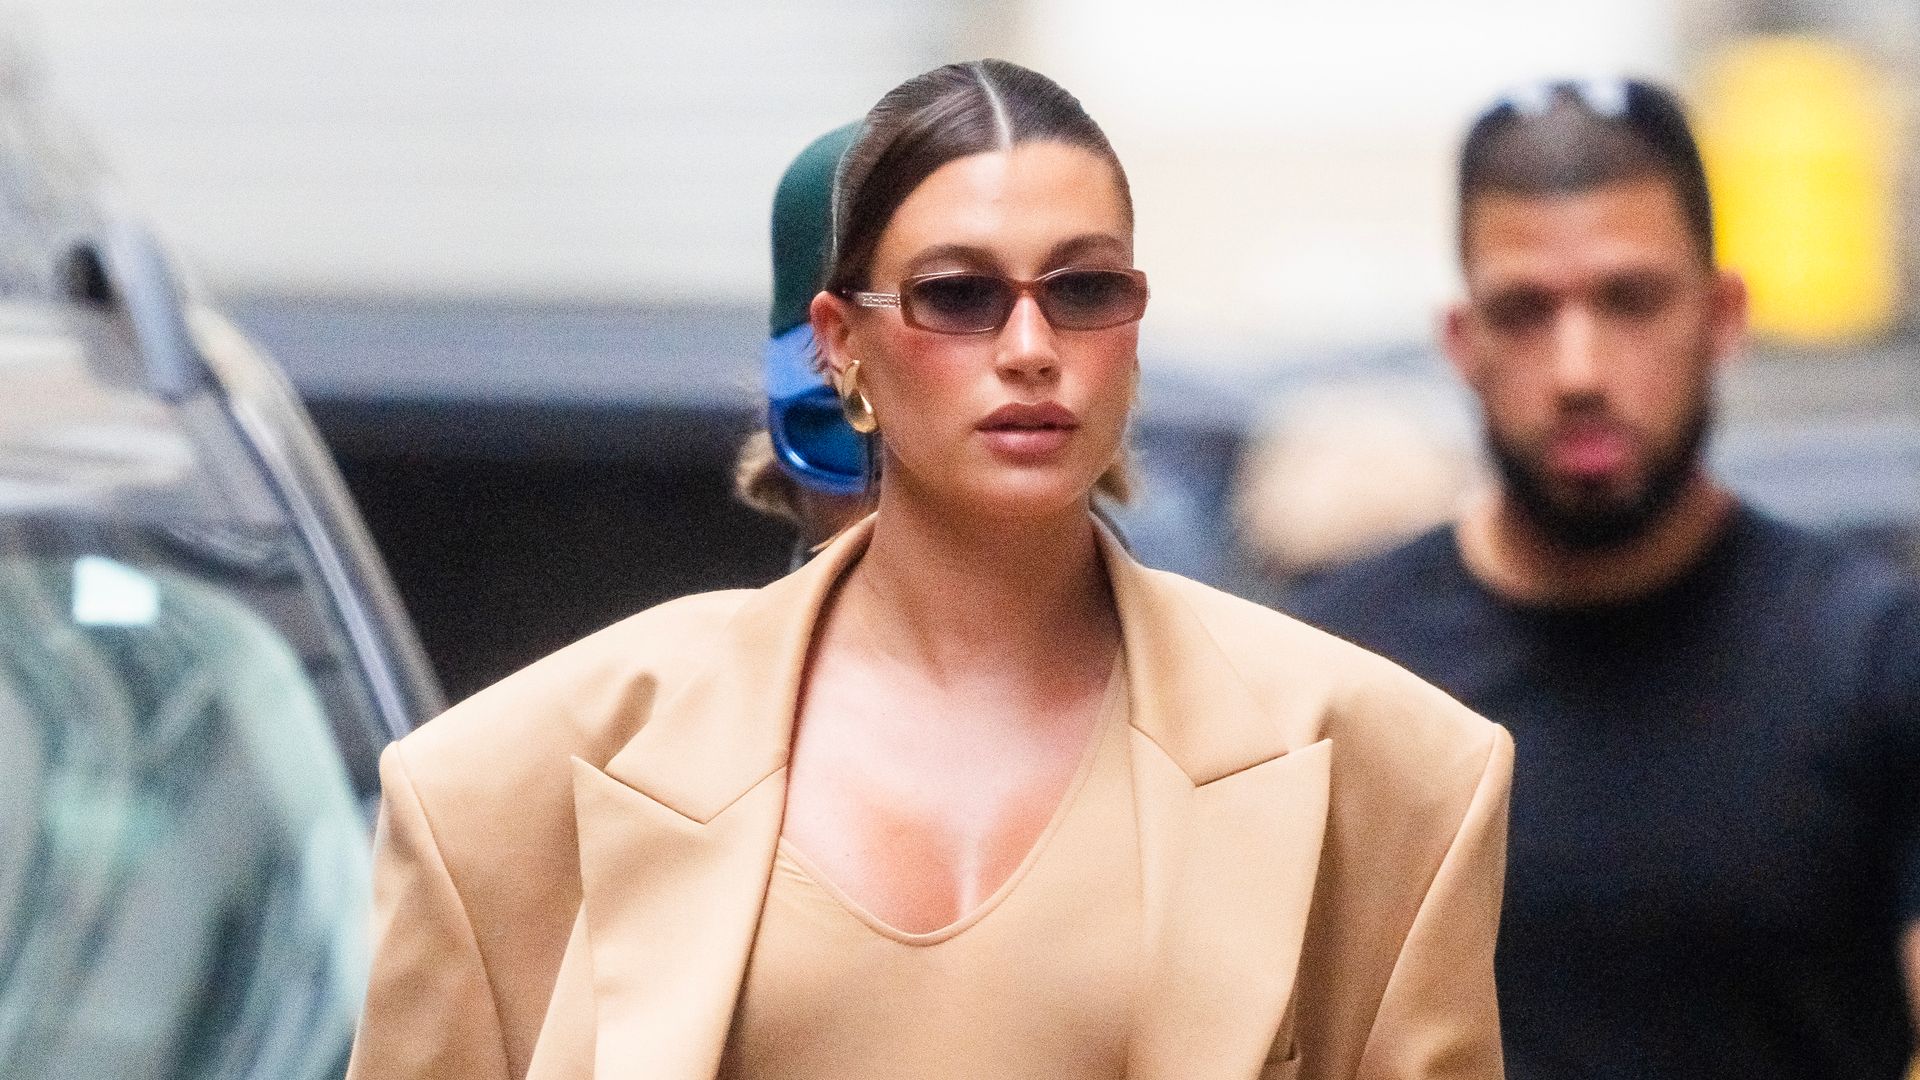 Hailey Bieber's Maternity Style: Model takes New York City by storm with chic looks